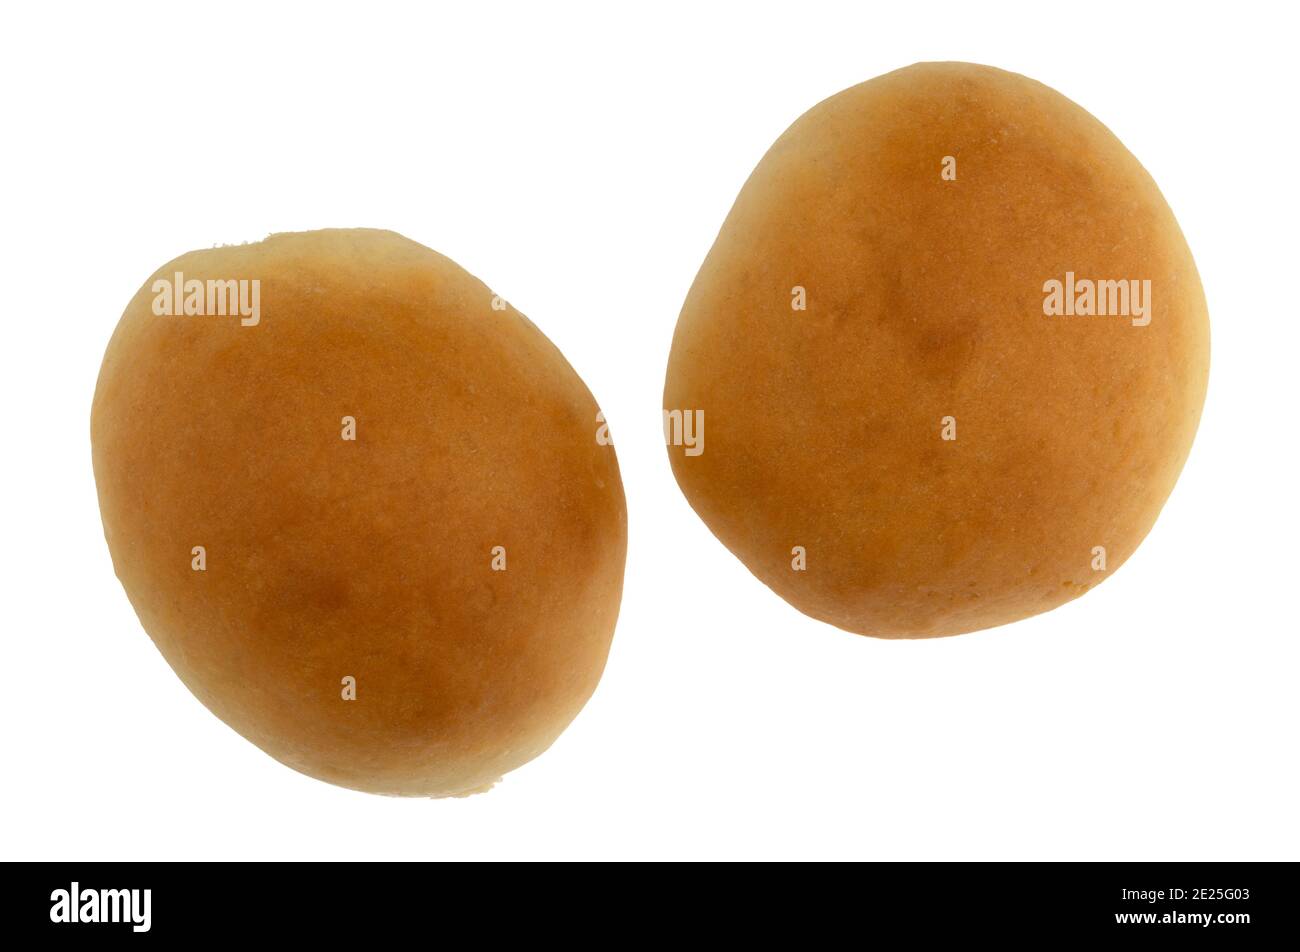 Top view of two fresh homemade yeast rolls isolated on a white background. Stock Photo